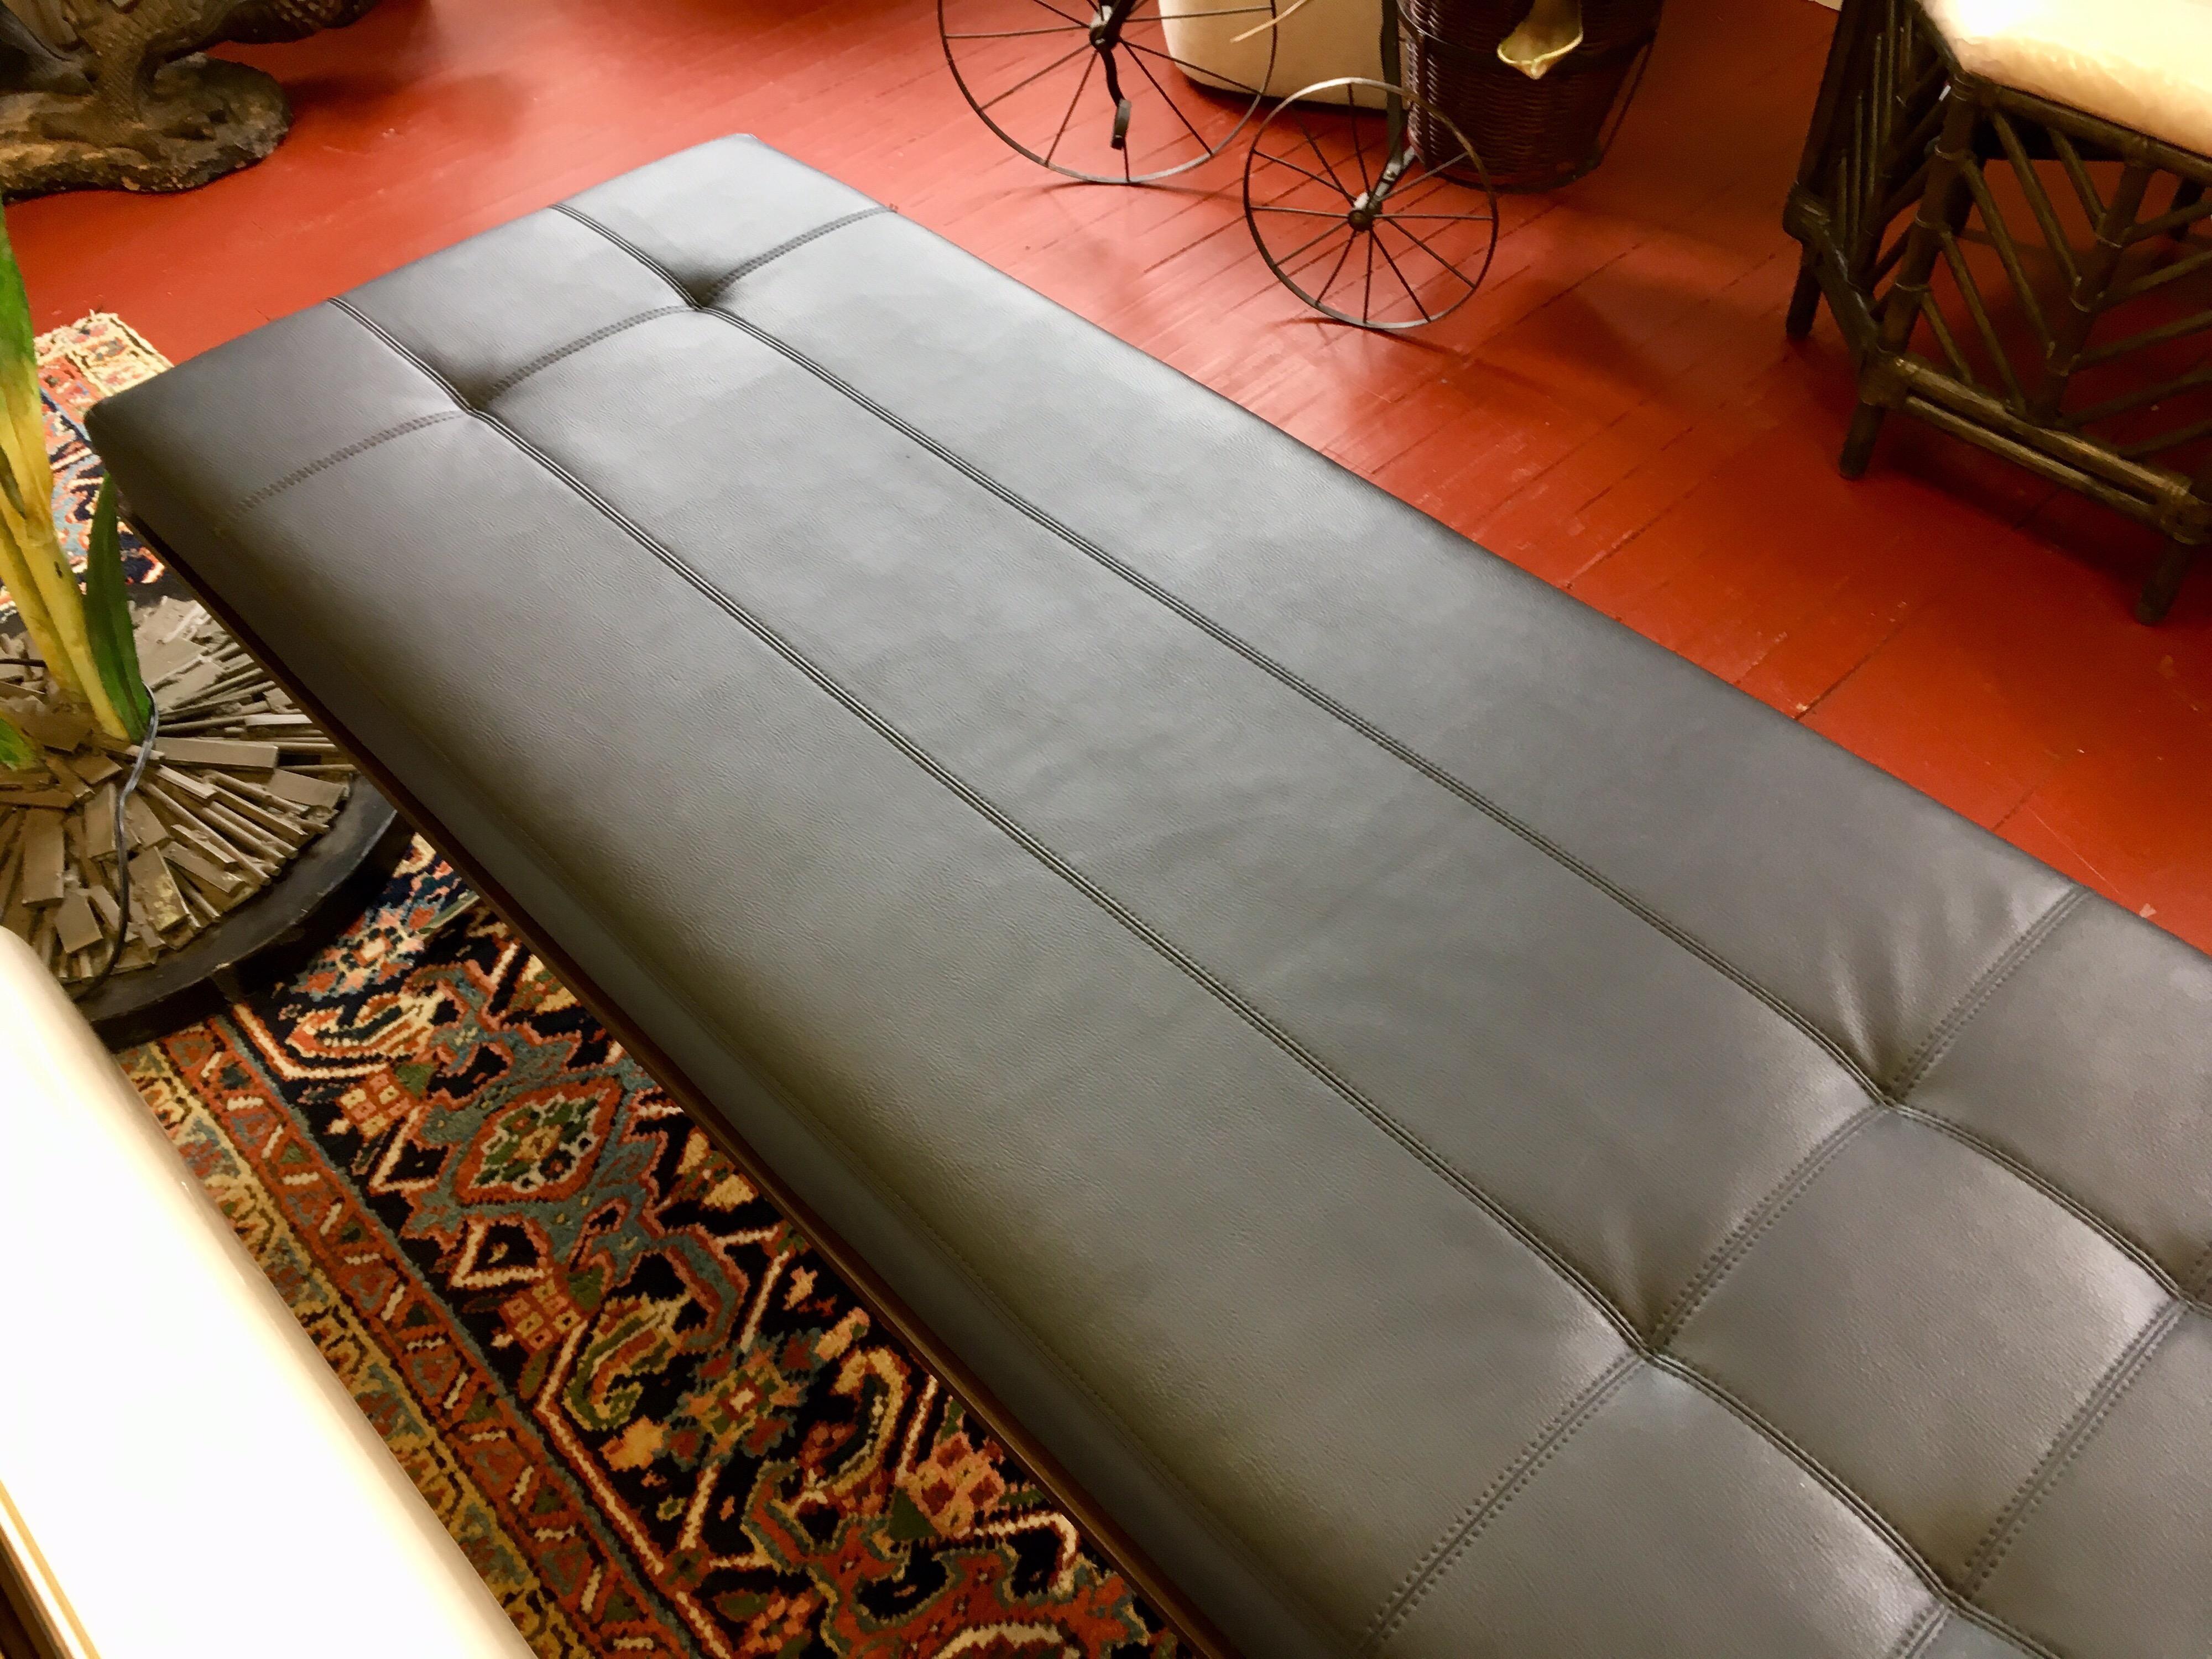 American Pair of Bernhardt Black Leather & Mahogany Chaise Lounge Settees Lounger Daybeds